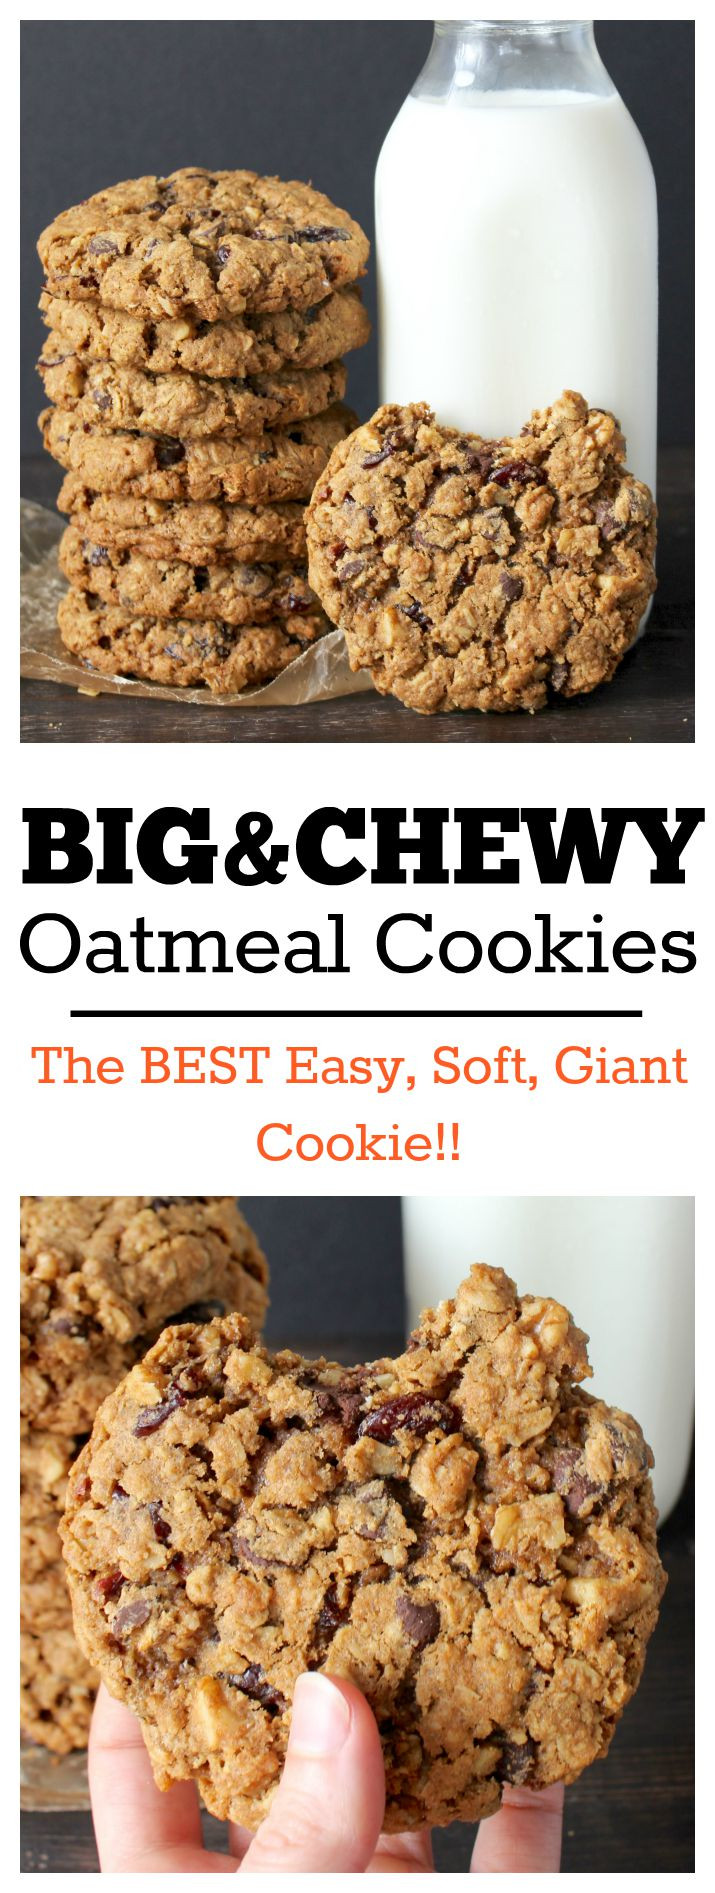 Recipes For Oatmeal Cookies
 Big and Chewy Oatmeal Cookies Jay s Baking Me Crazy